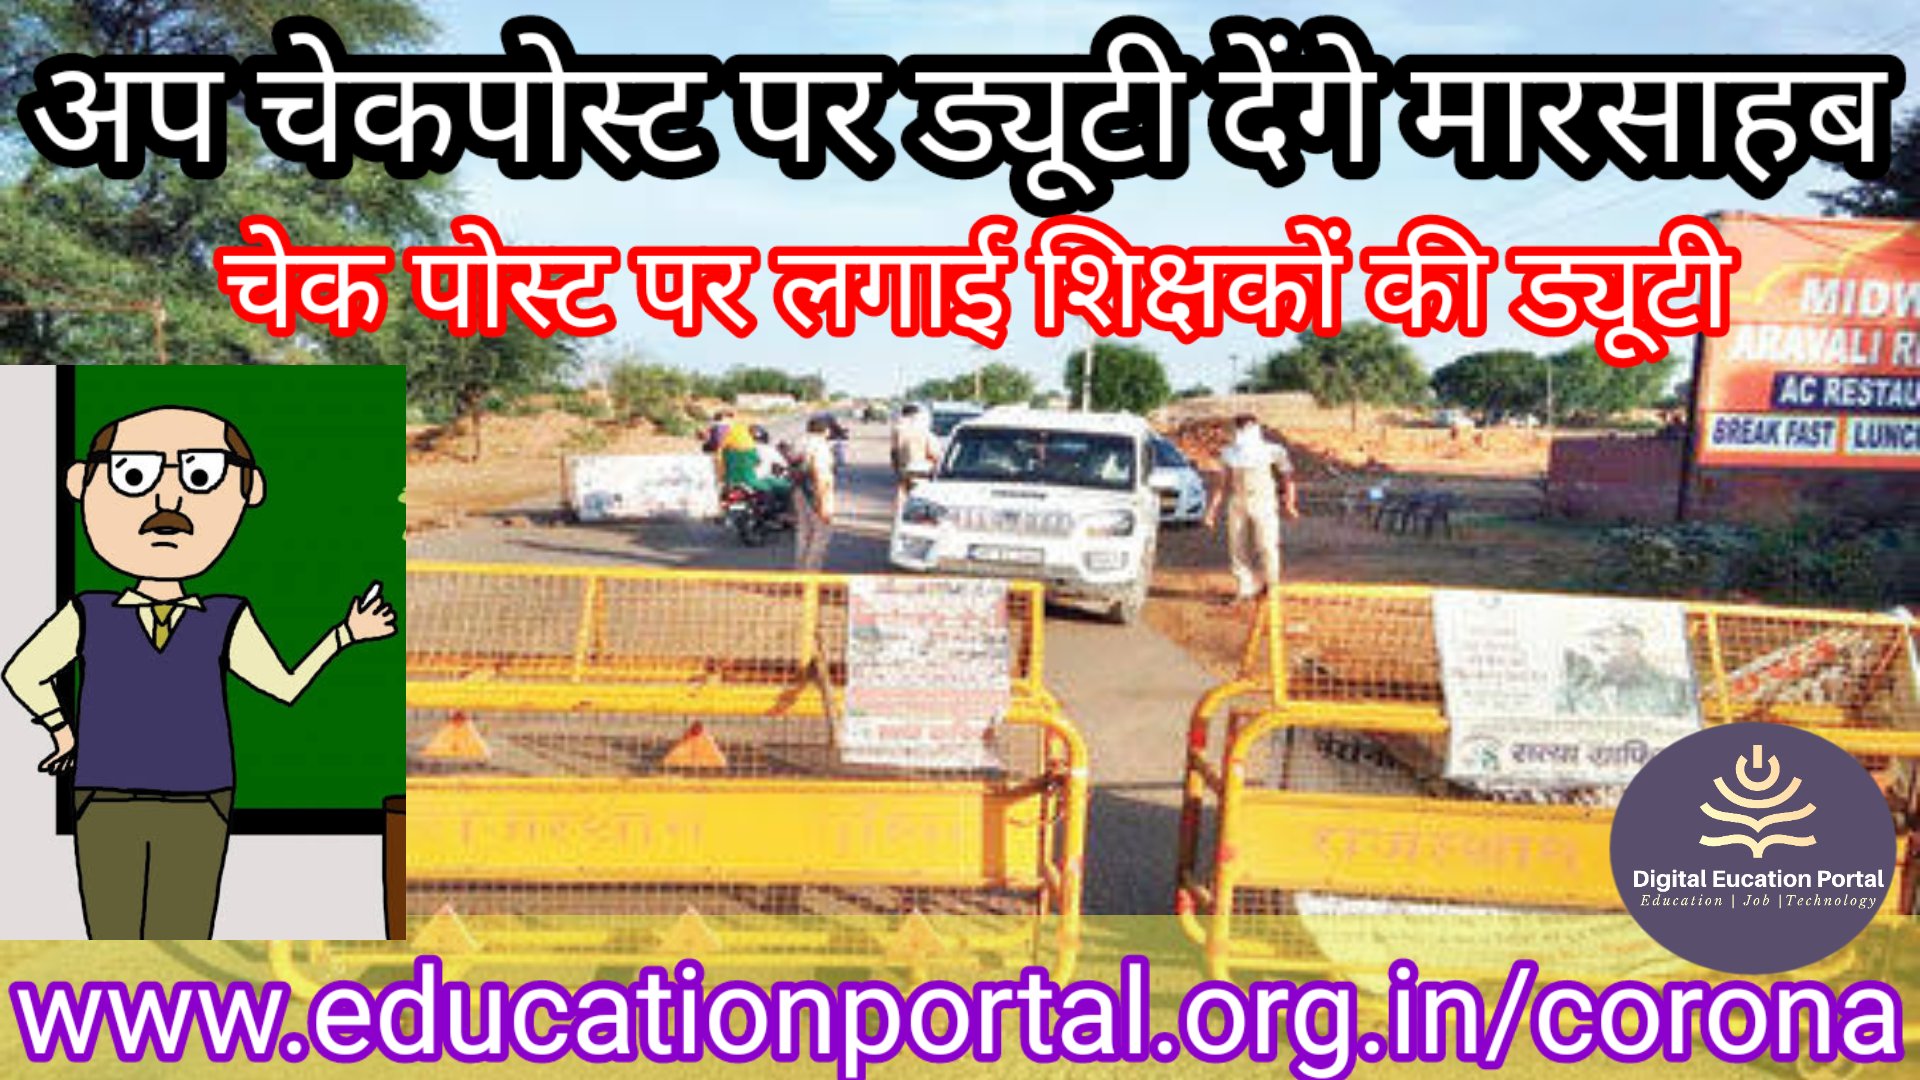 Now Marsahab will do duty on check post, teachers' duty in this district of Madhya Pradesh